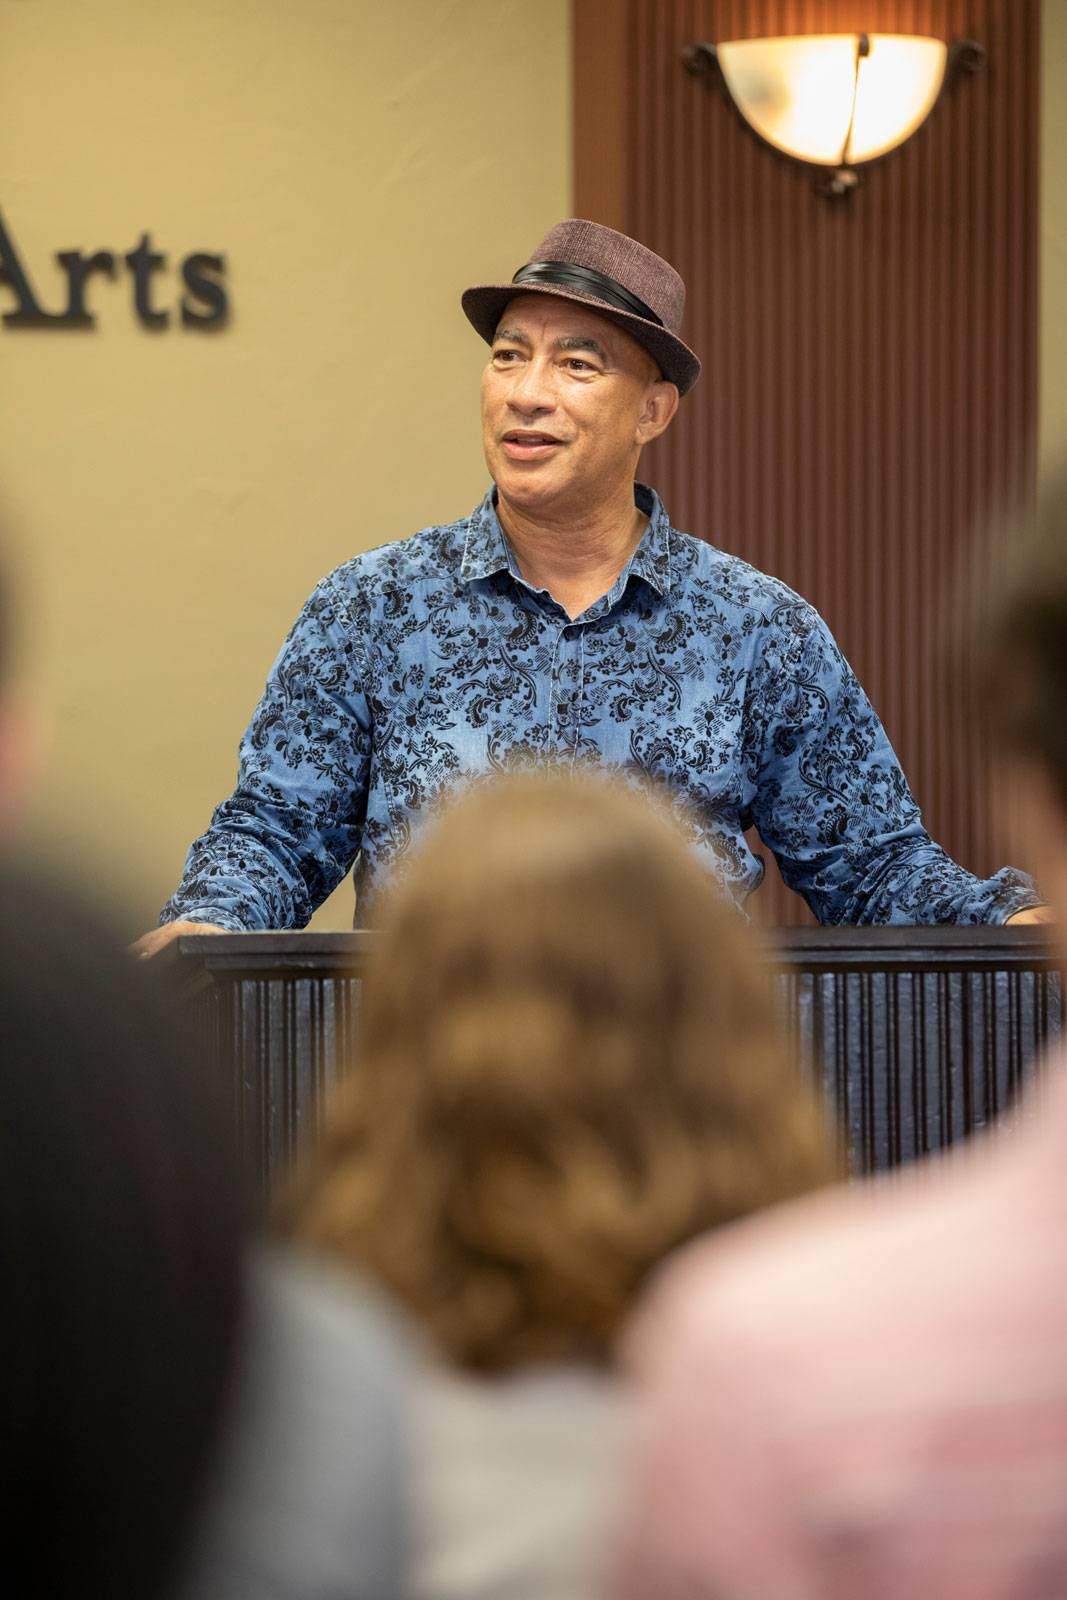 Cyrus Cassells stands at a podium at a poetry reading